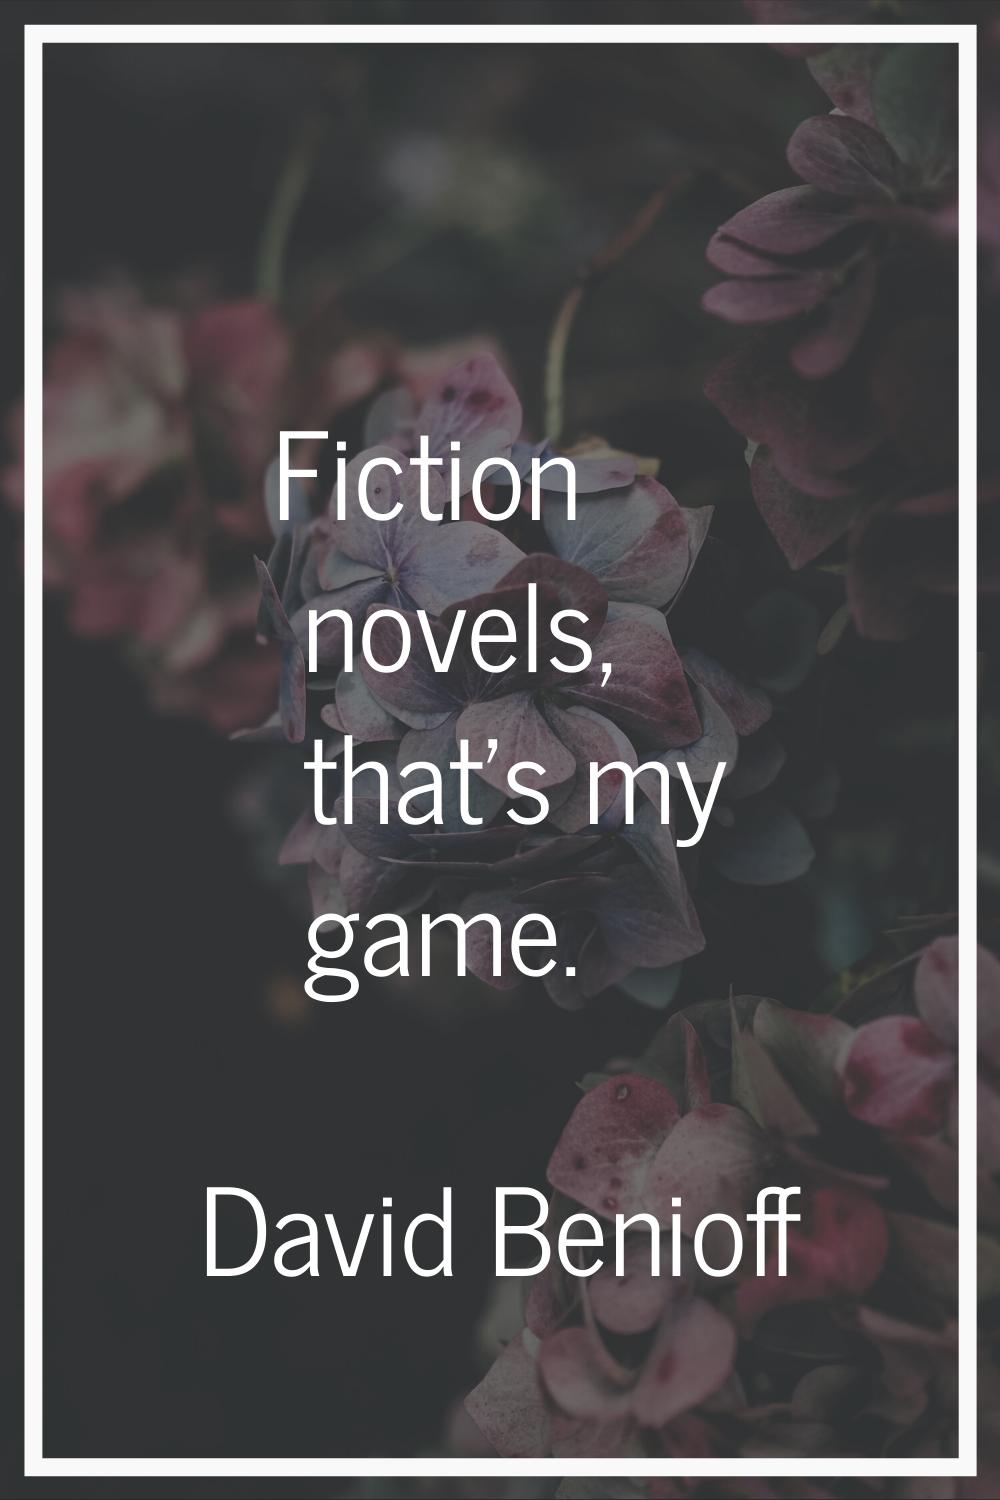 Fiction novels, that's my game.